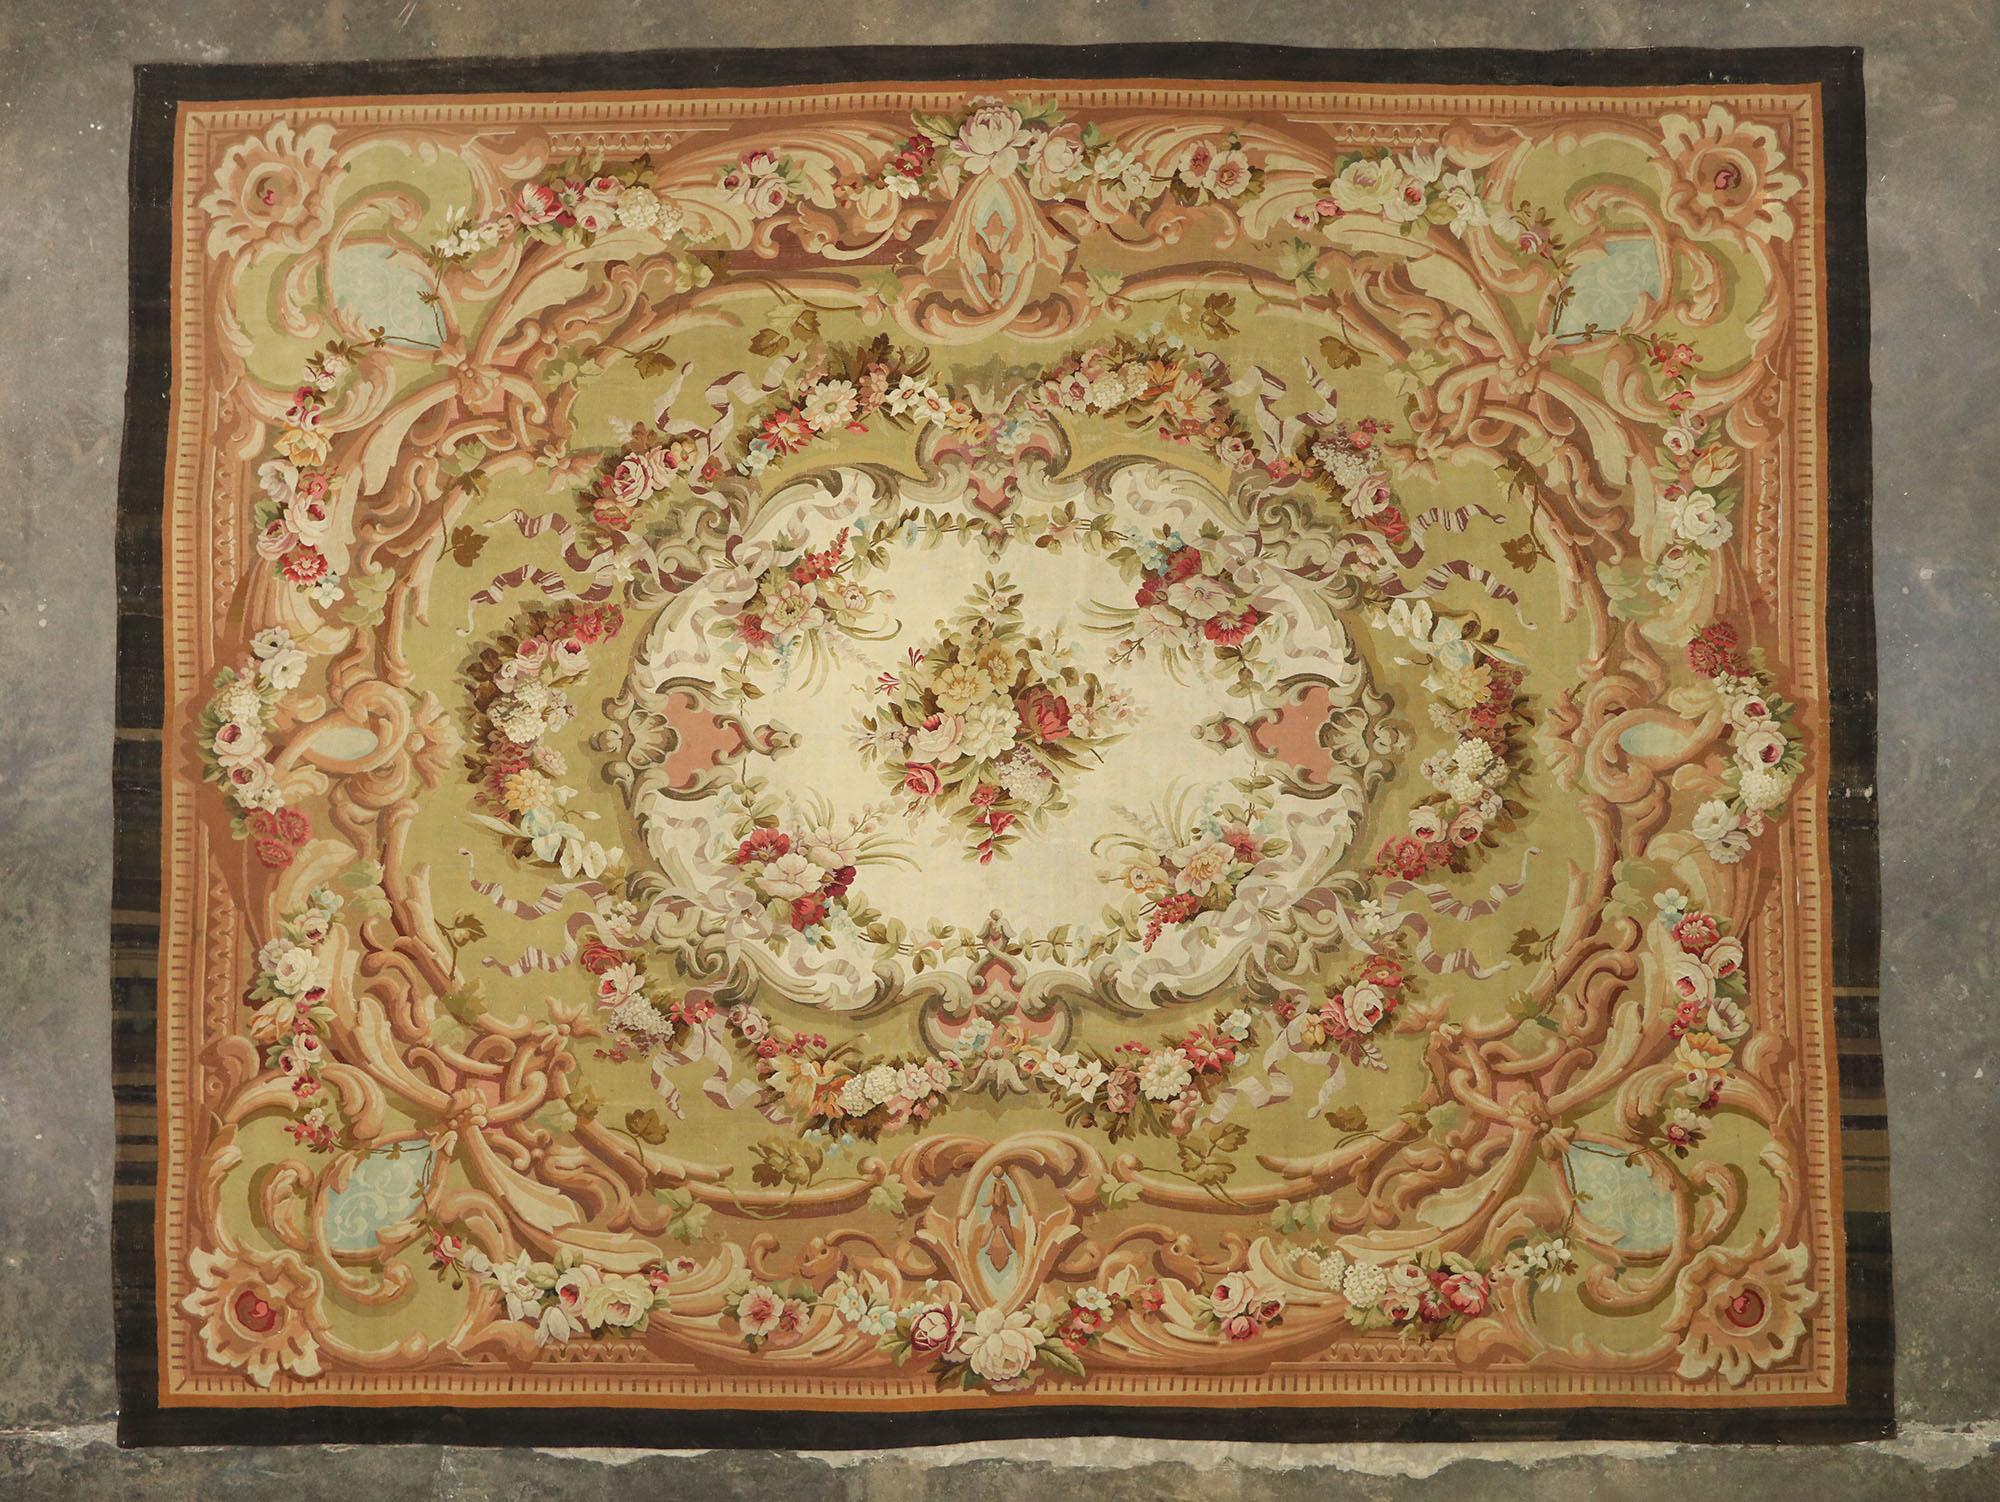 19th Century Antique French Aubusson Palace Size Rug with Rococo Louis XV Savonnerie Style